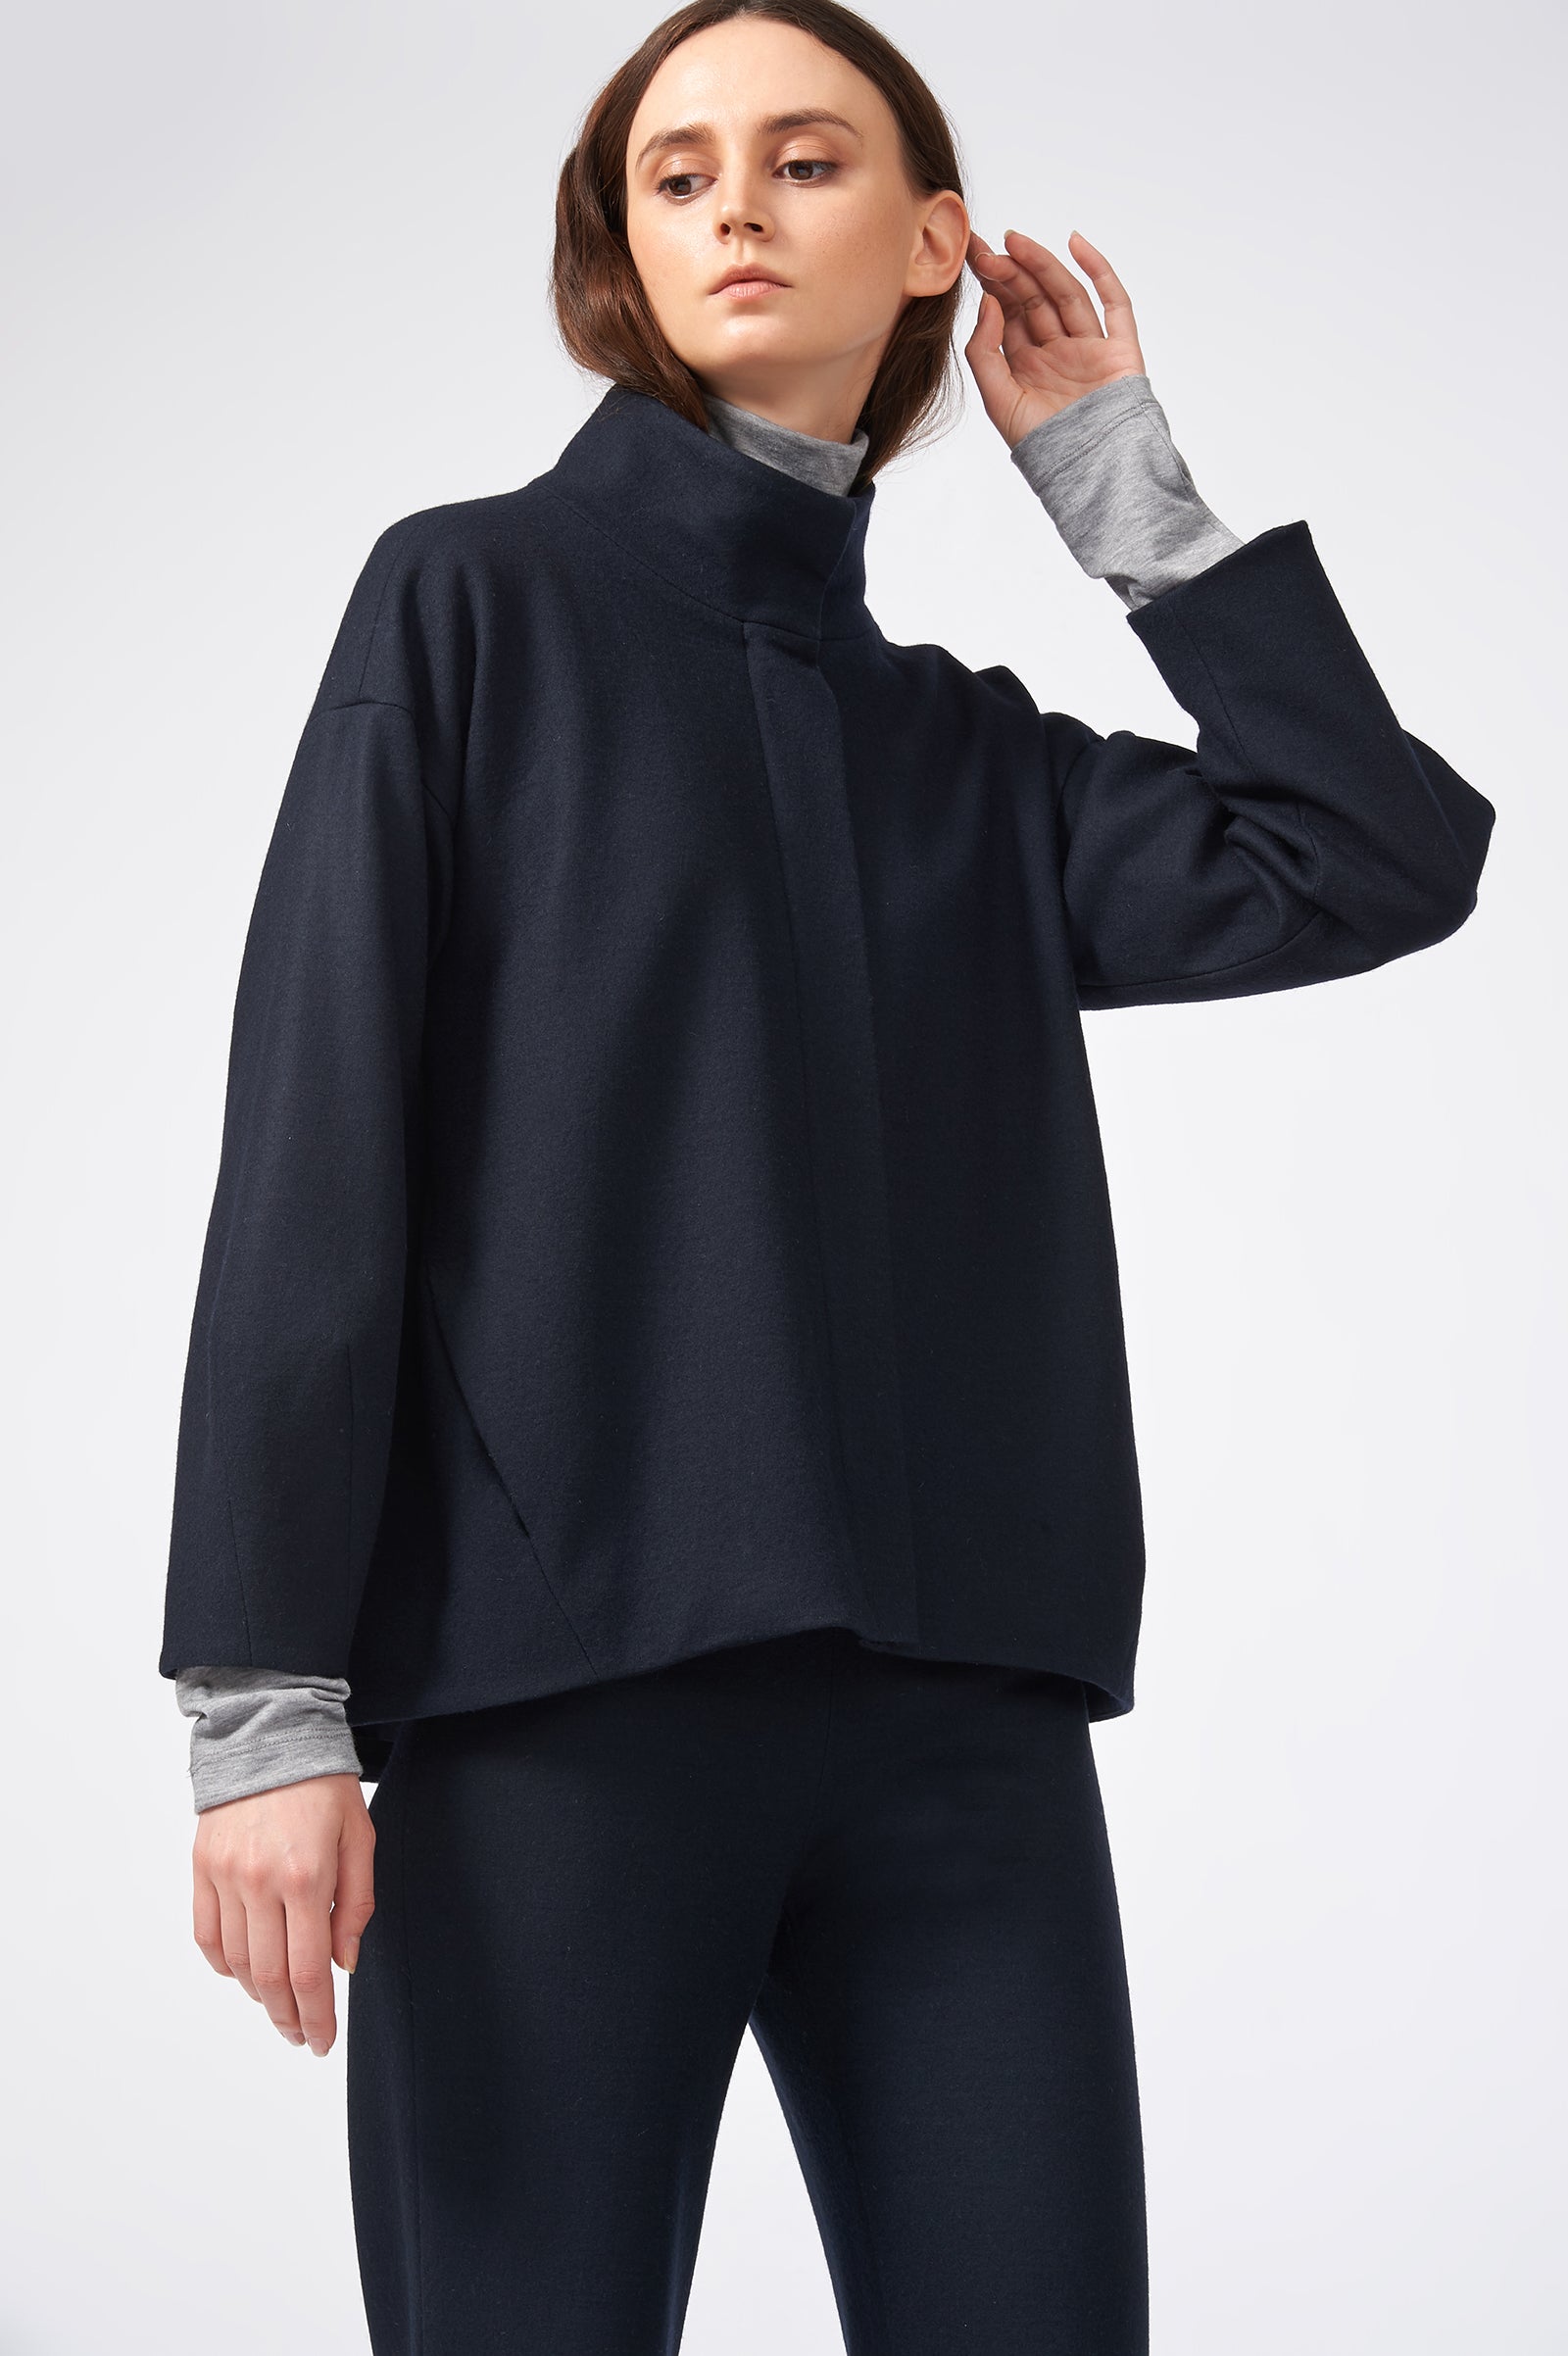 Kal Rieman Angle Cuff Jacket in Midnight on Model Front Side View